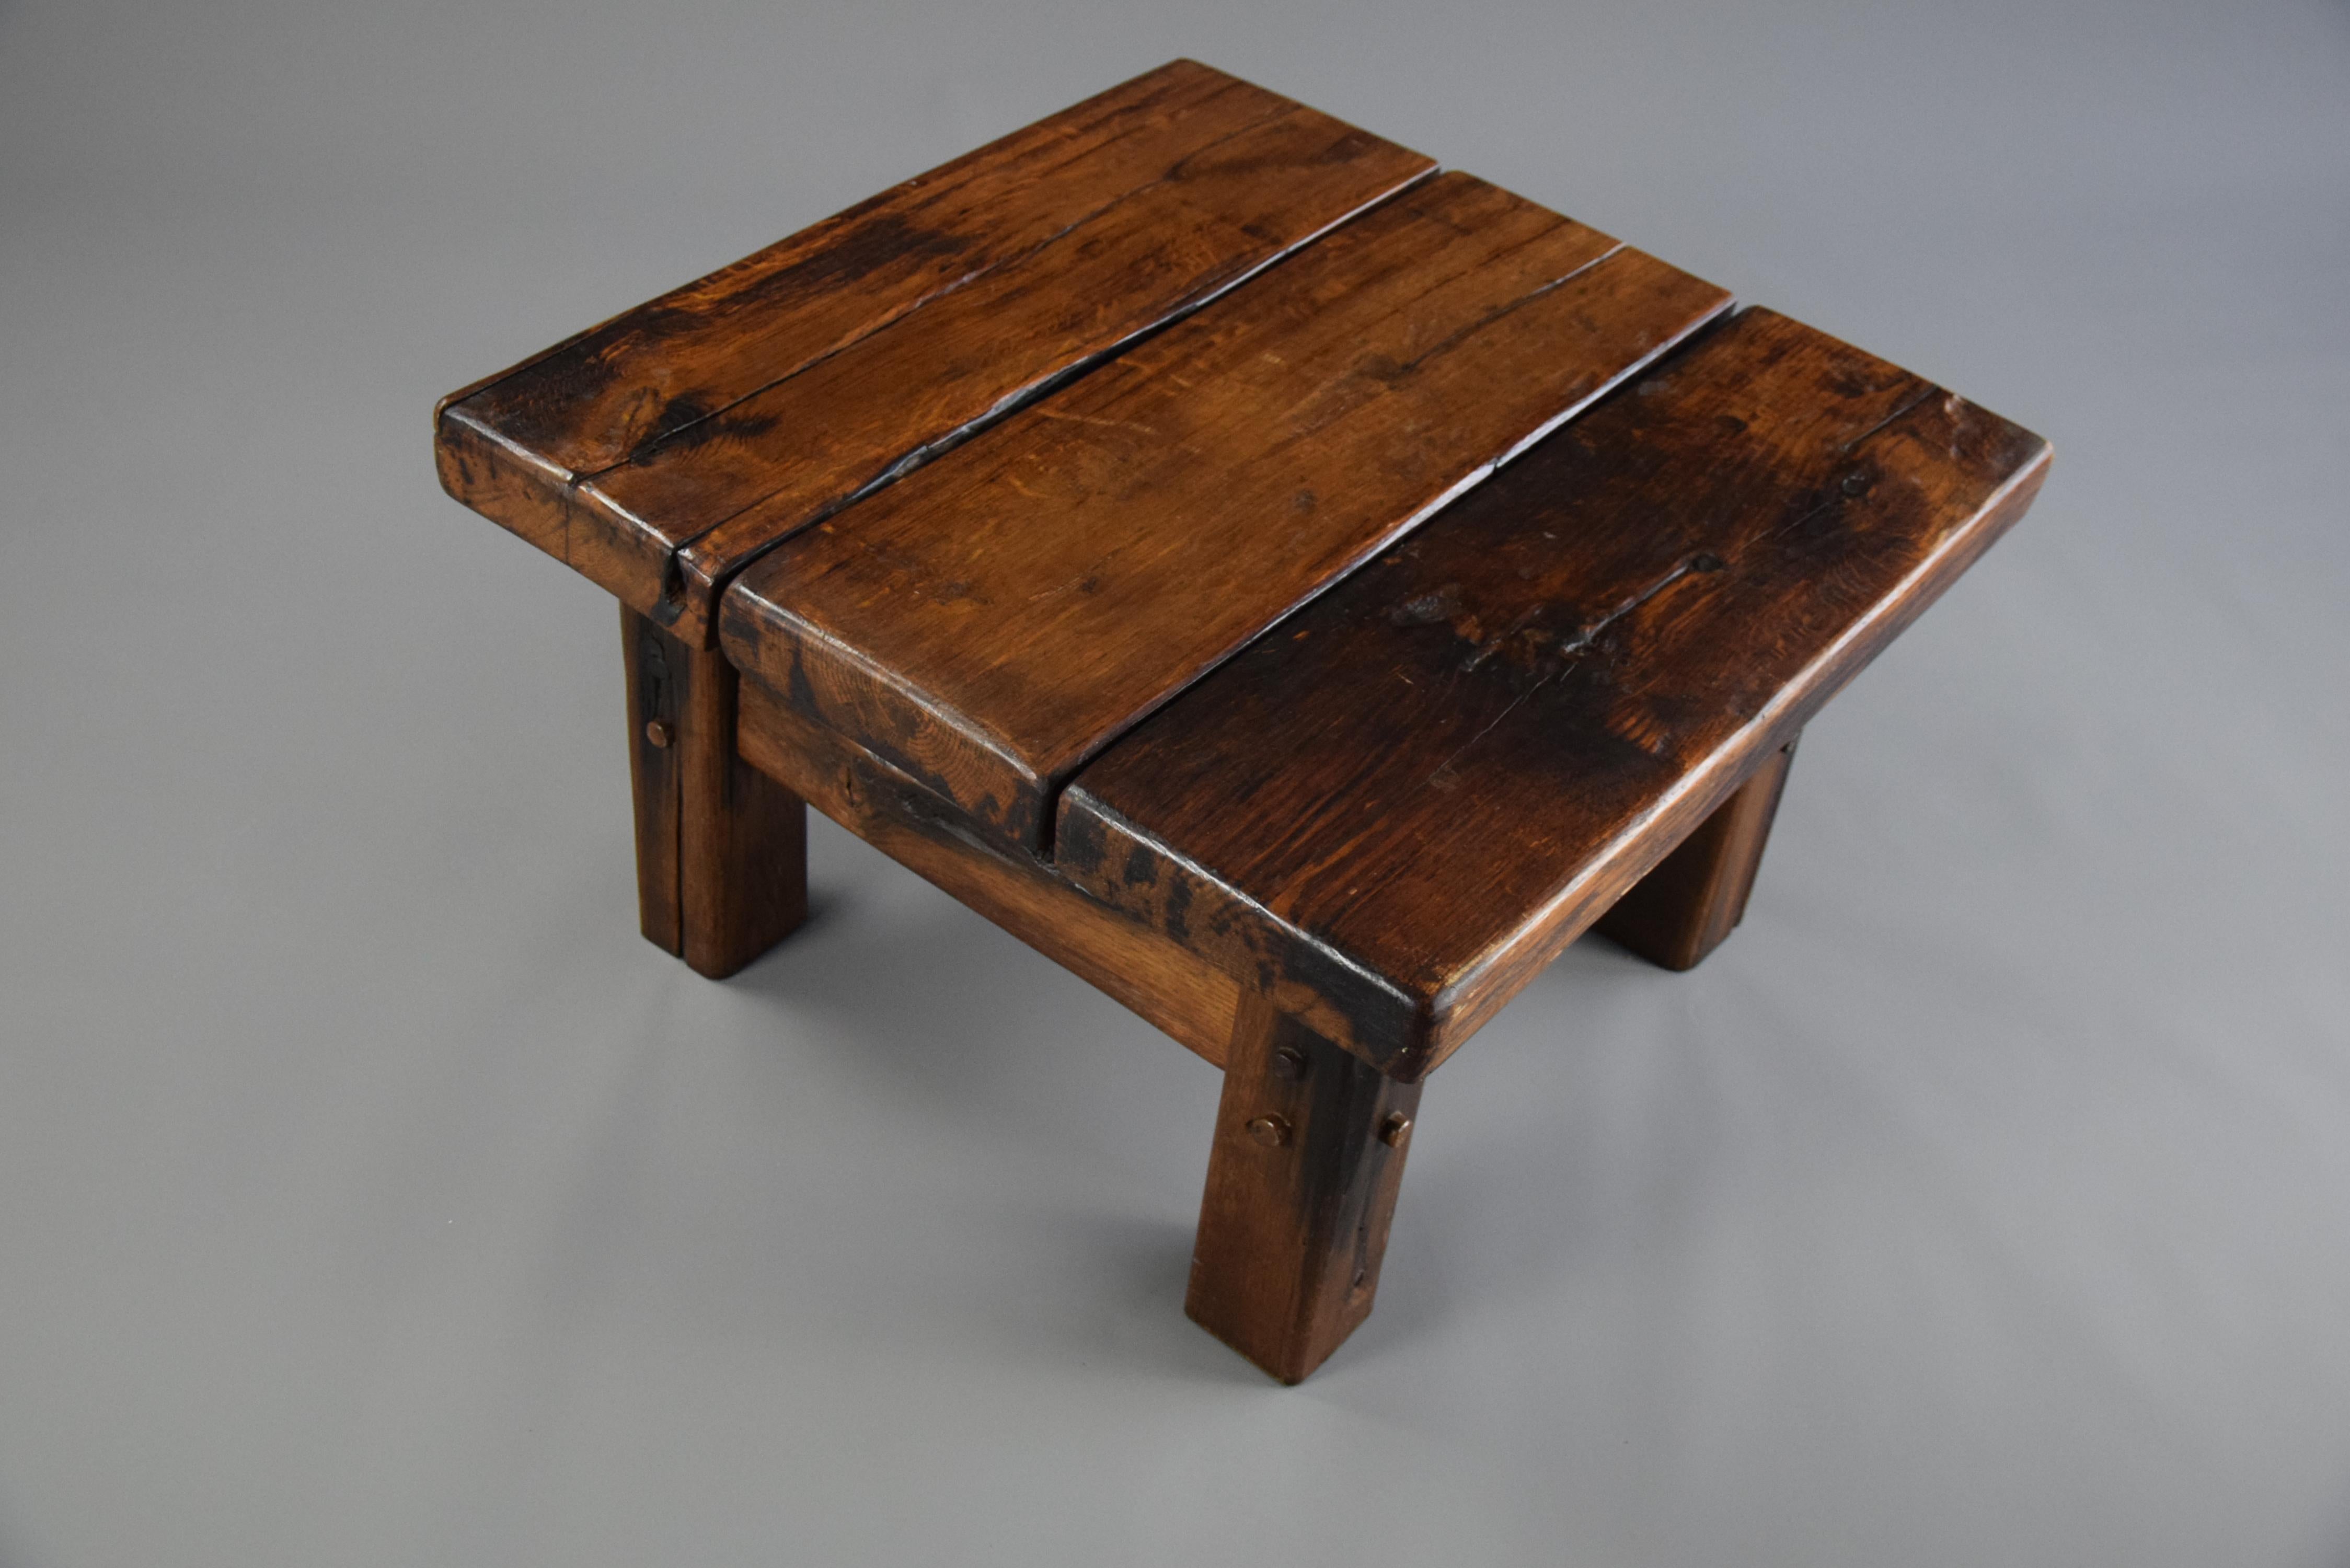 Striking robust brutalist coffee table made of solid Elm wood. The elm has warm colors and a fantastic patina from use over decades of years.

Measurements : 77 x 77 x 45cm - 30.31 x 30.31 x 17.72 inches.

This beauty will be shipped insured